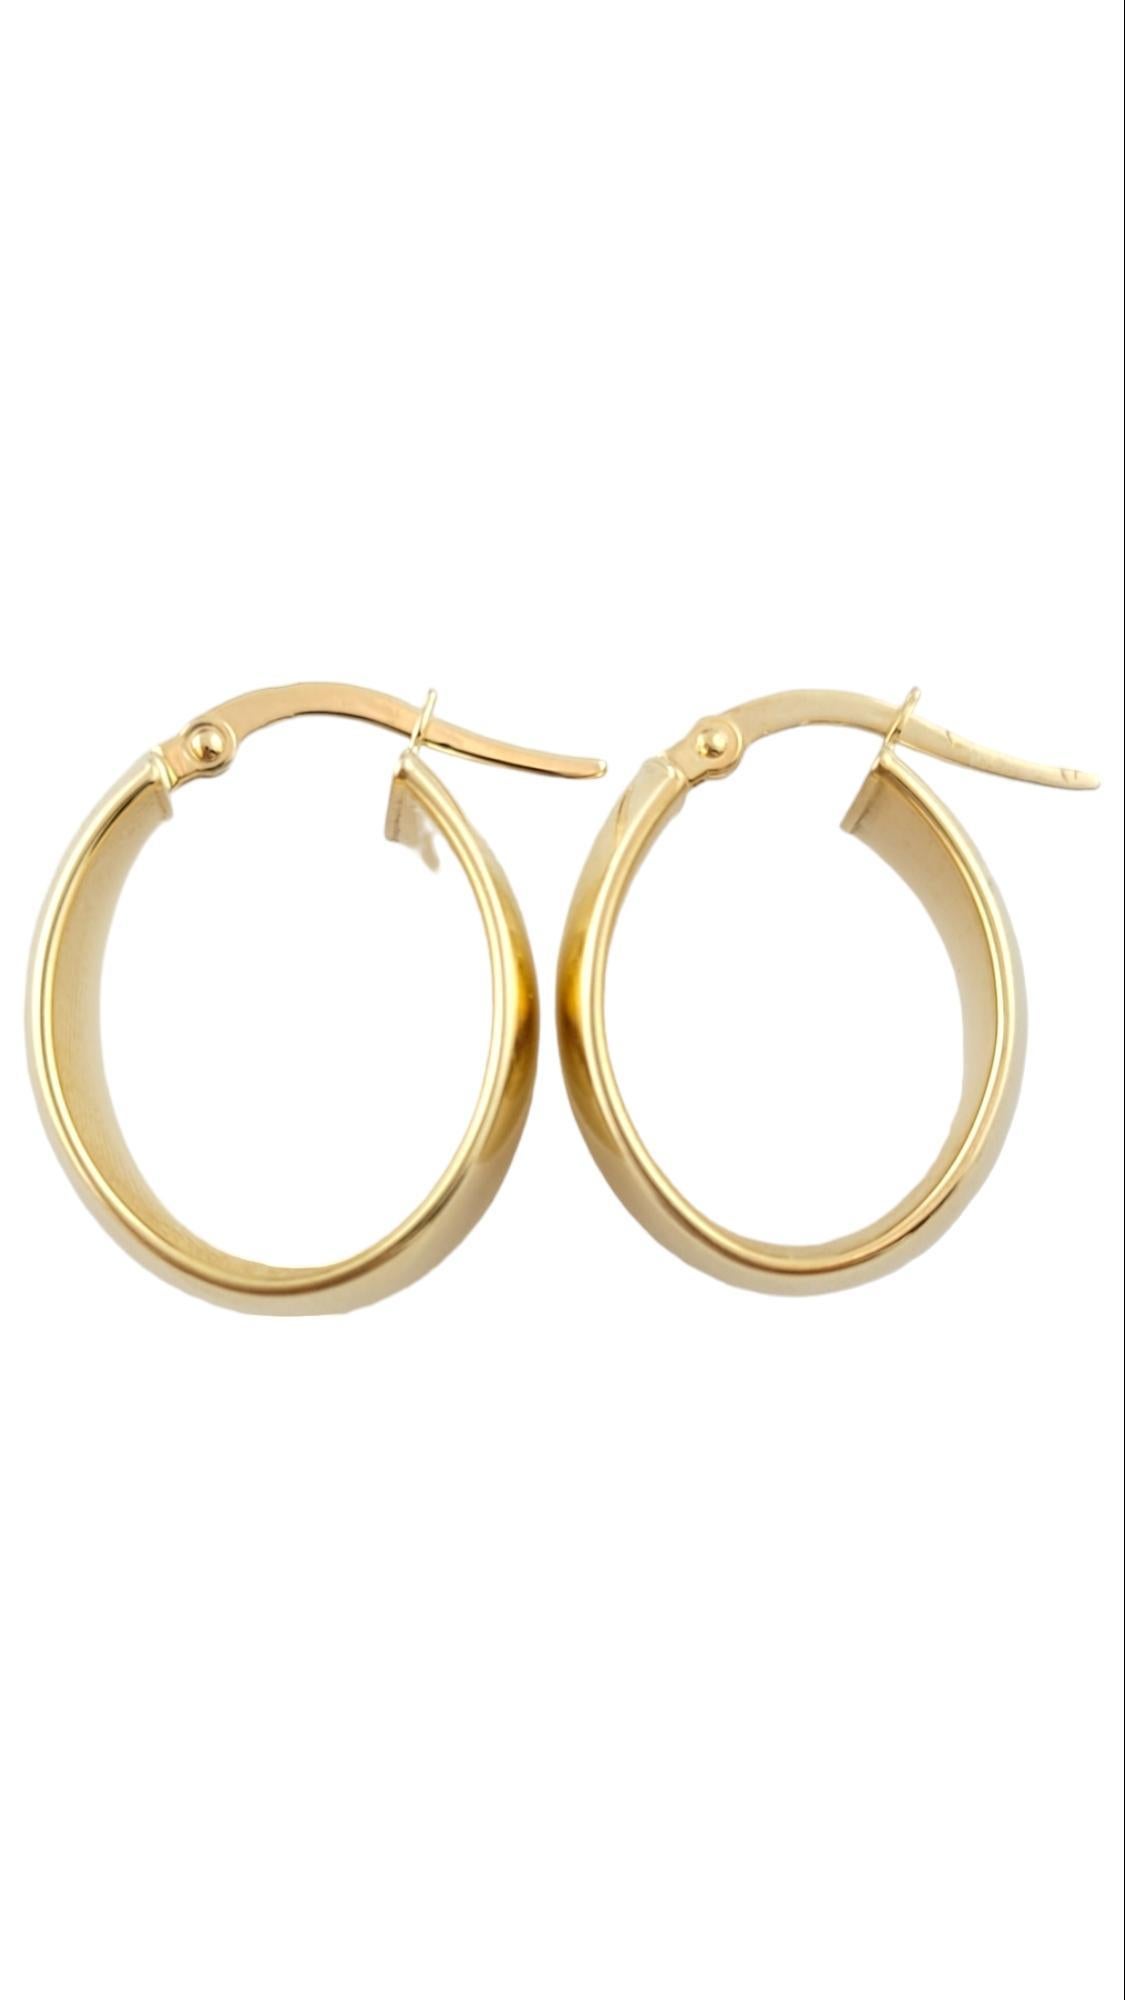 18K Yellow Gold Hoop Earrings

This classic set of 18K gold hoops would look gorgeous on anyone!

Size: 22.99mm X 17.84mm X 7.79mm (.905